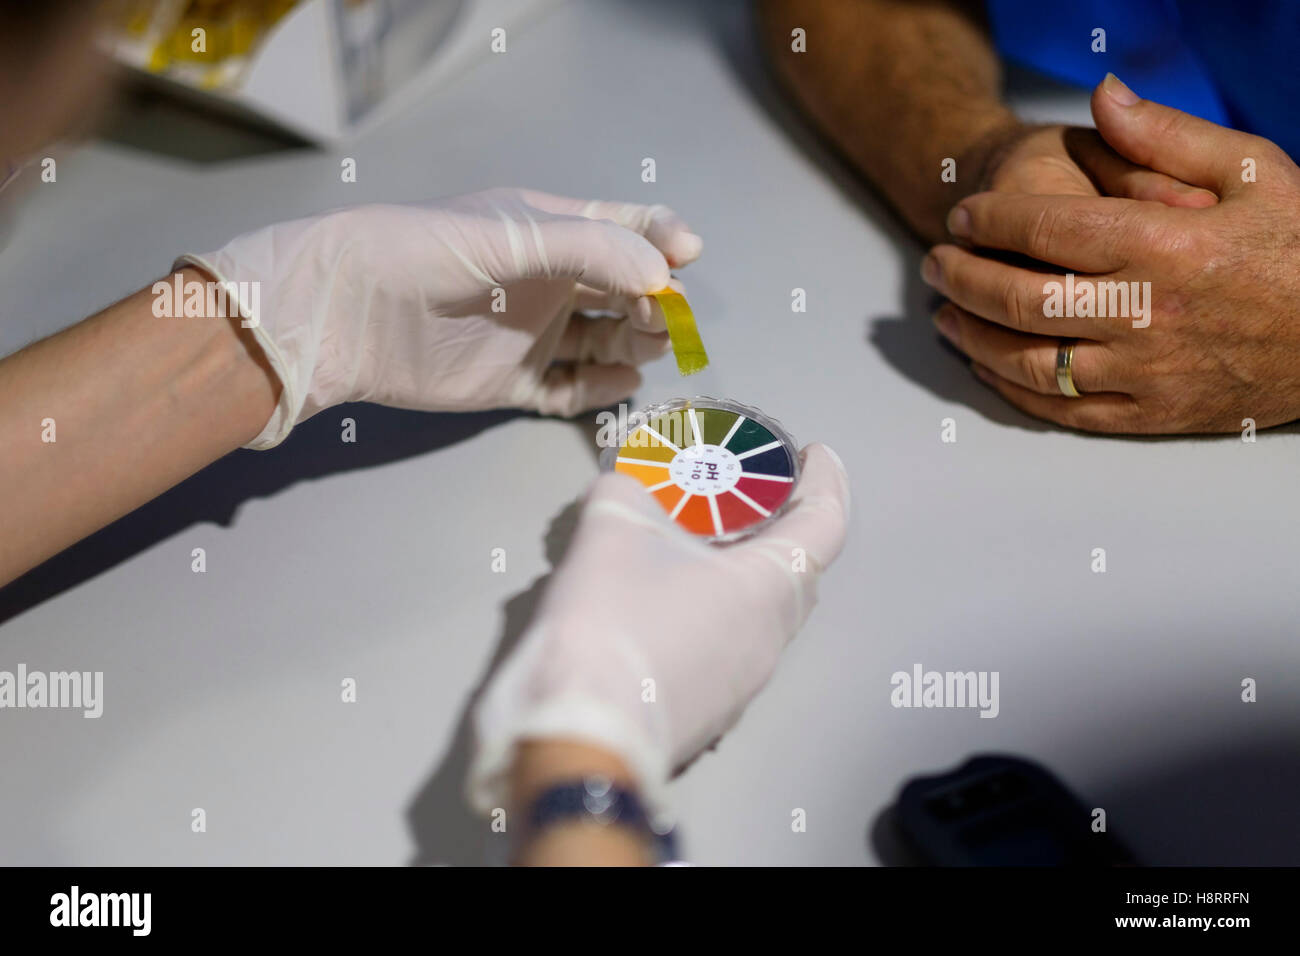 Medical worker using a pH scale meter to test a patient's saliva acidity or alkalinity Stock Photo